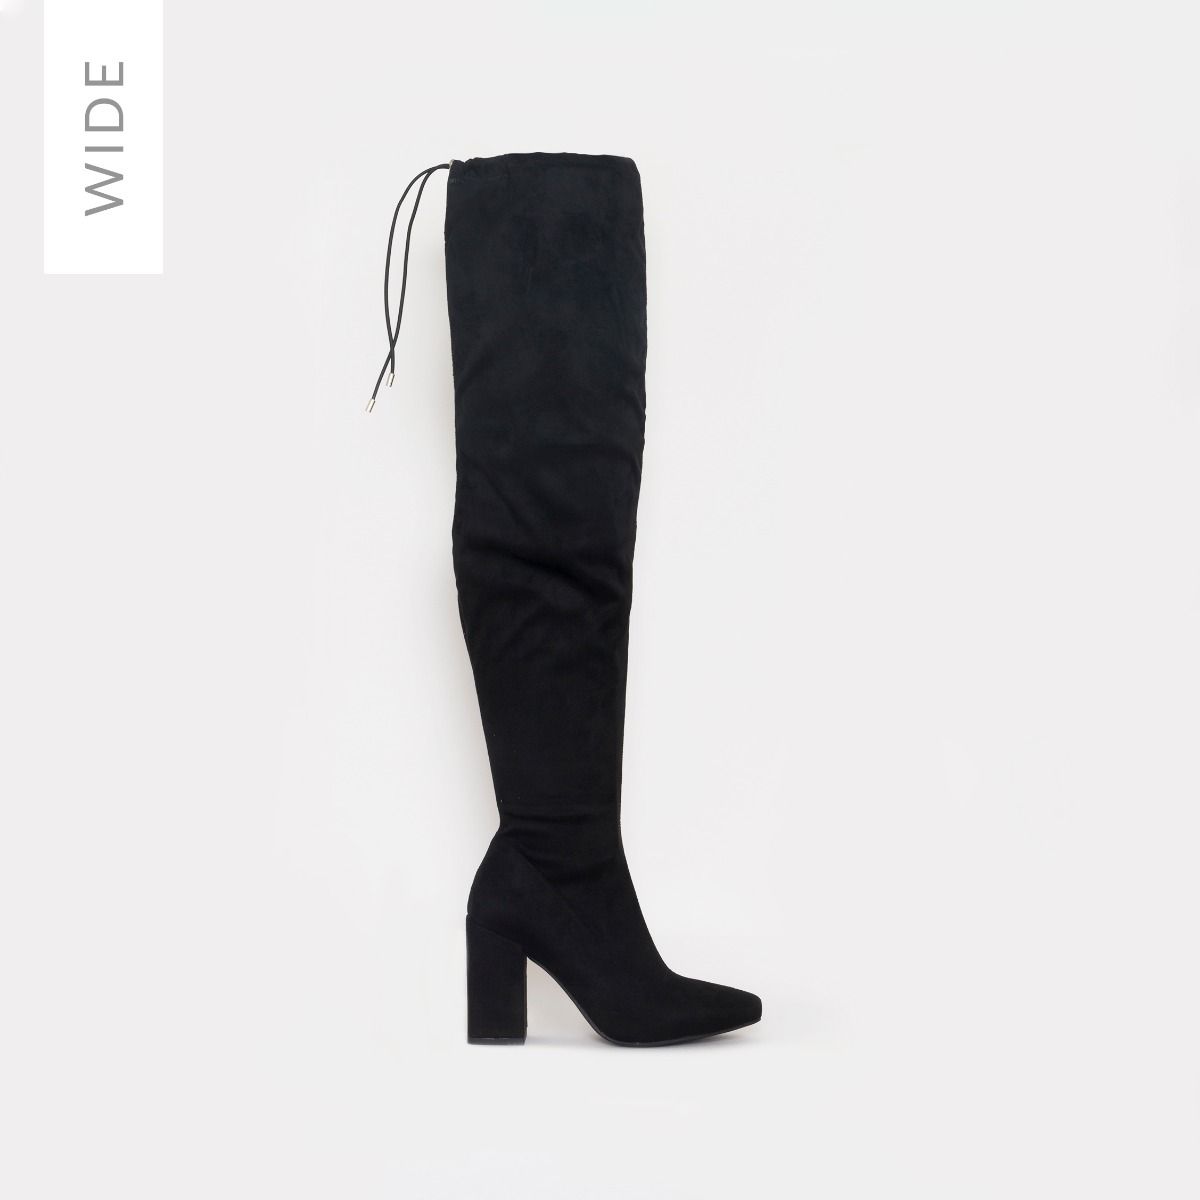 black suede boots wide fit